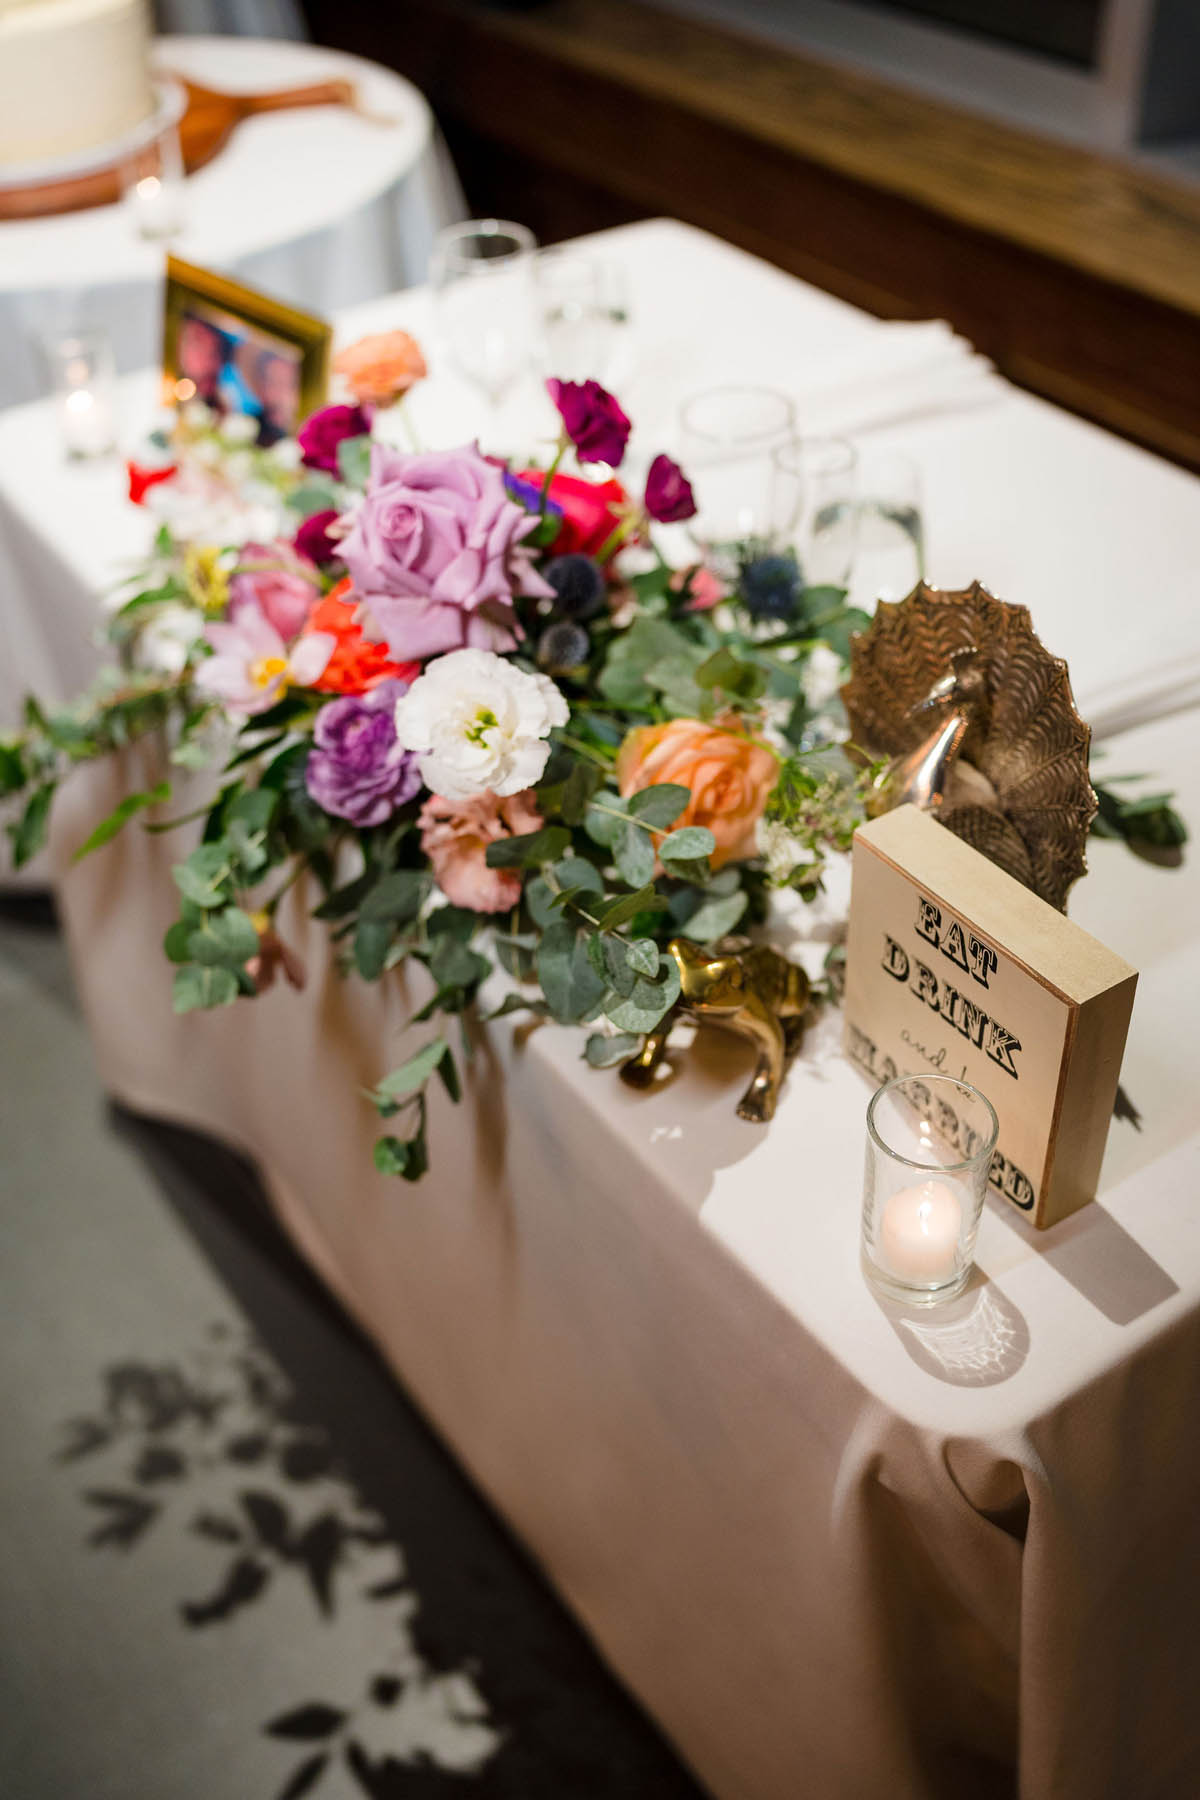 A memorial table with a white tablecloth and flowers.